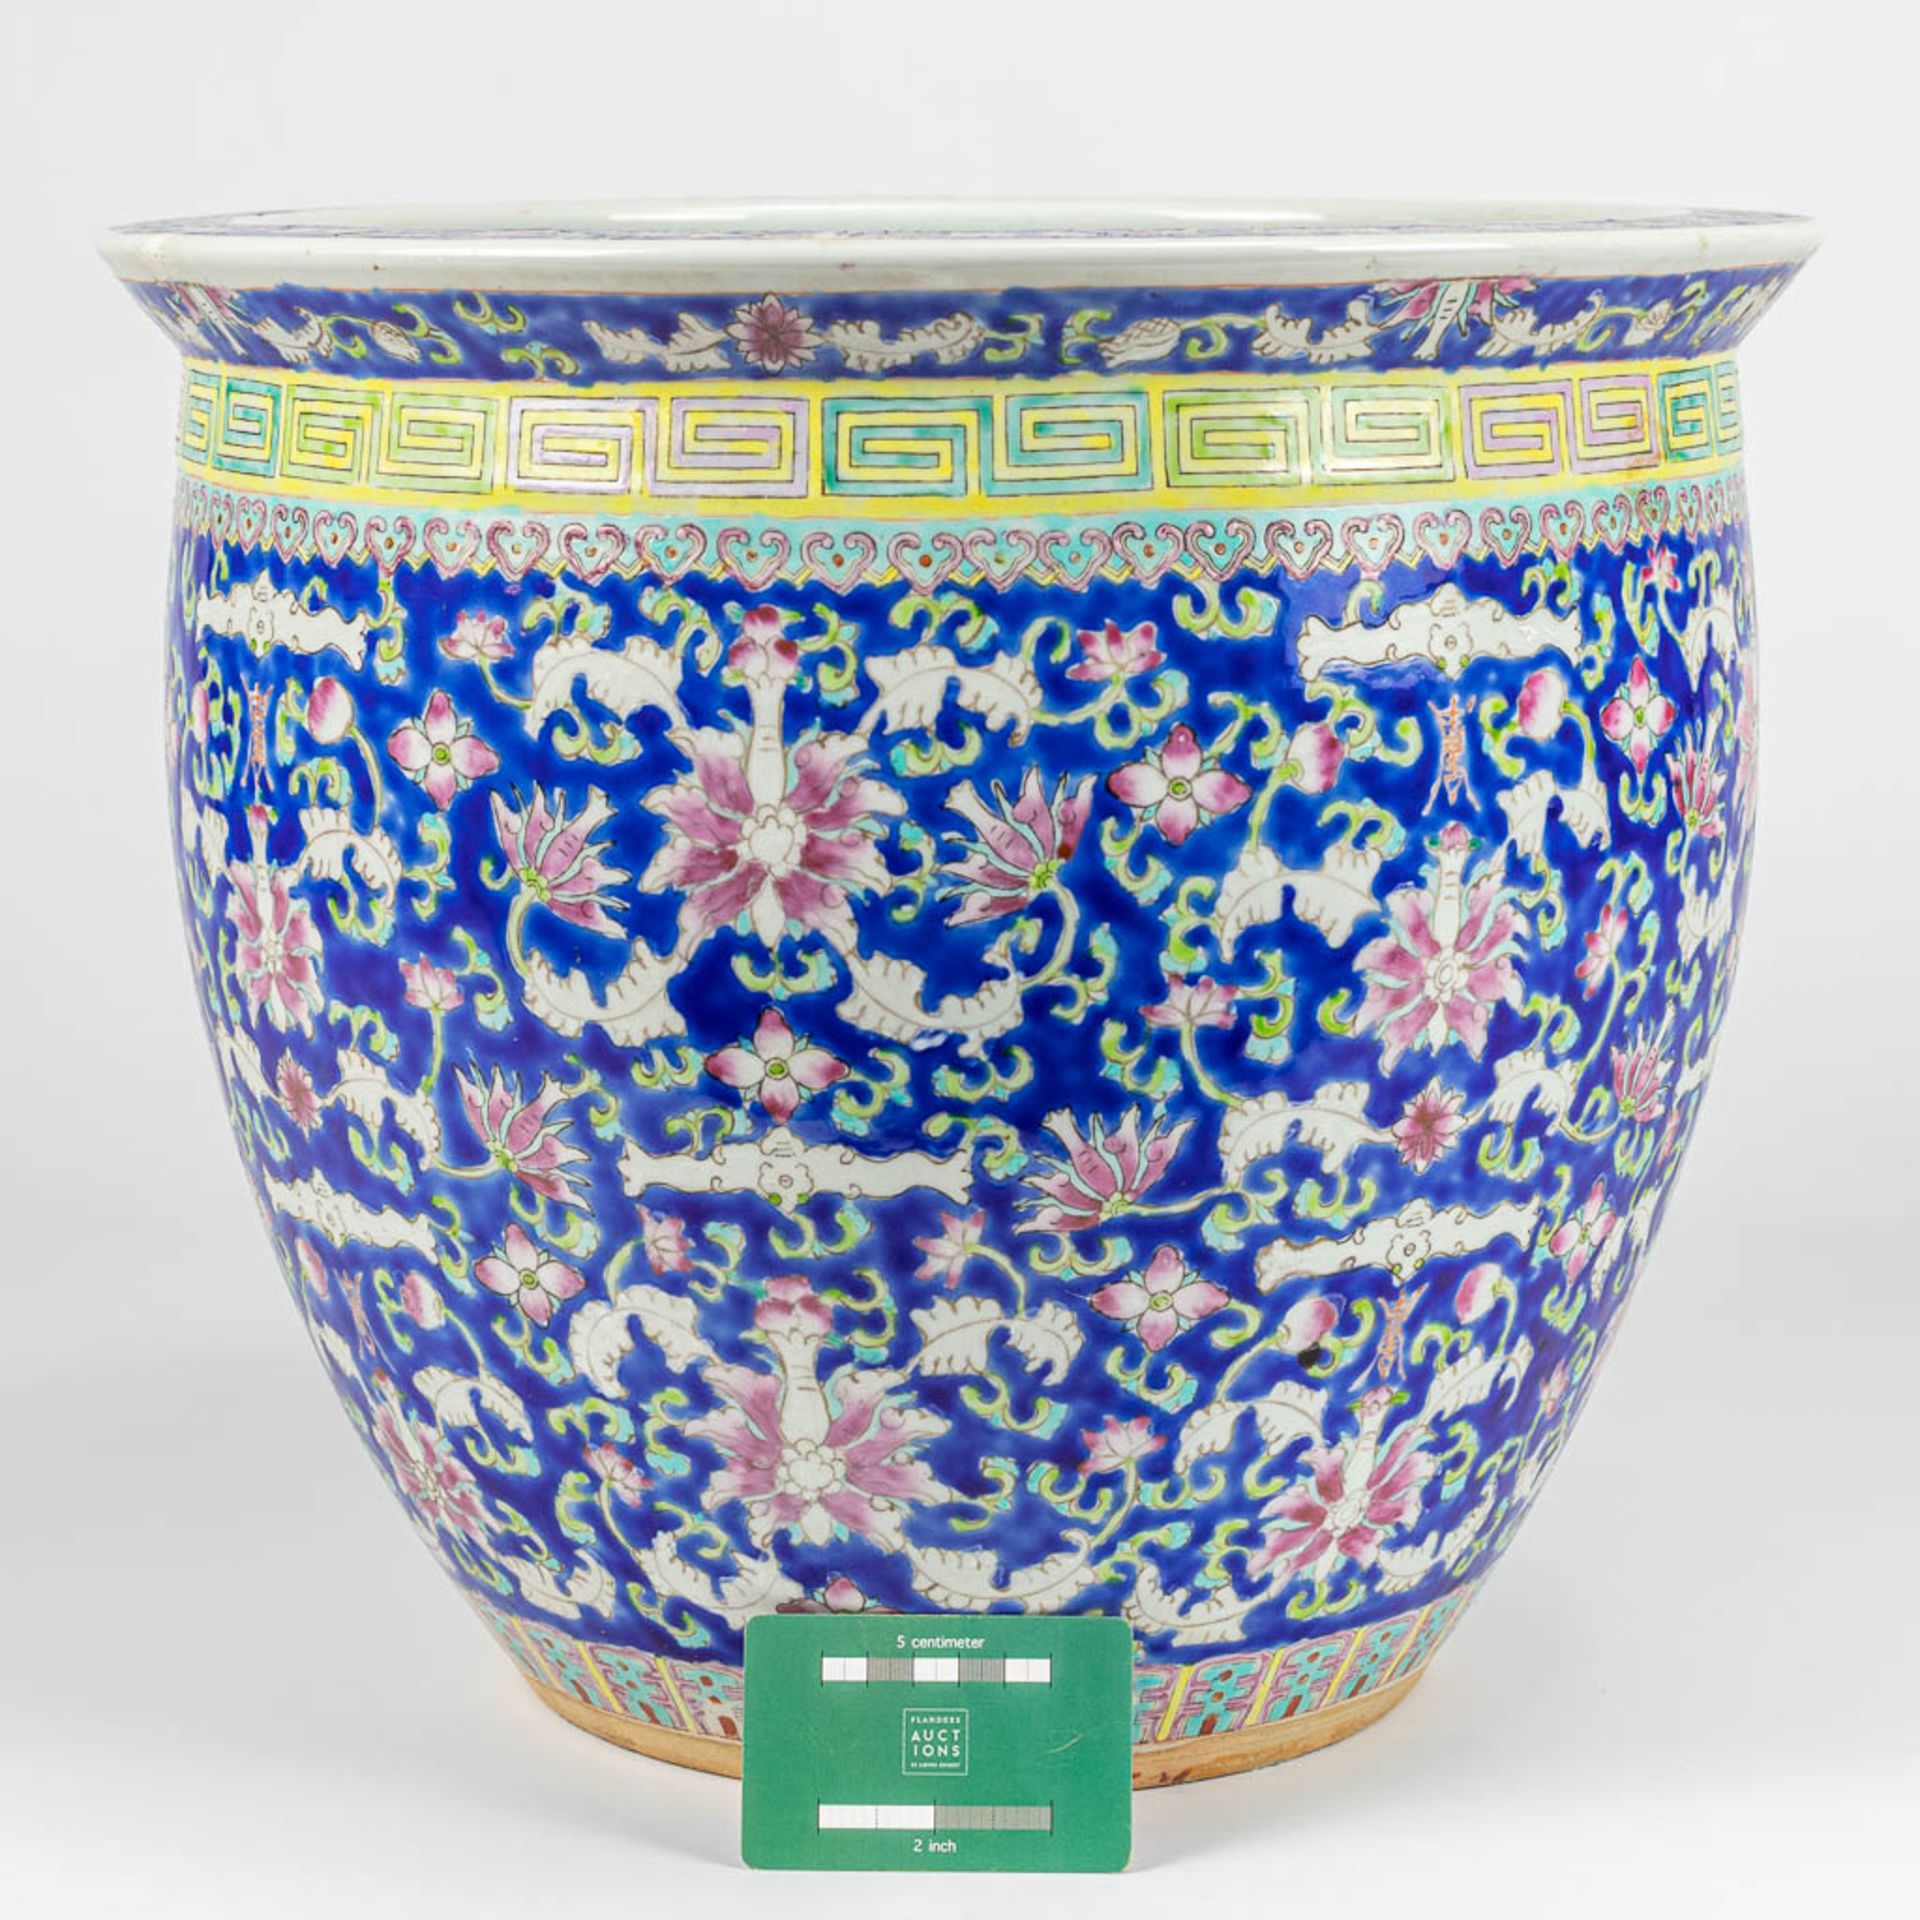 A large cache-pot made of Chinese porcelain and decorated with flowers - Image 4 of 10